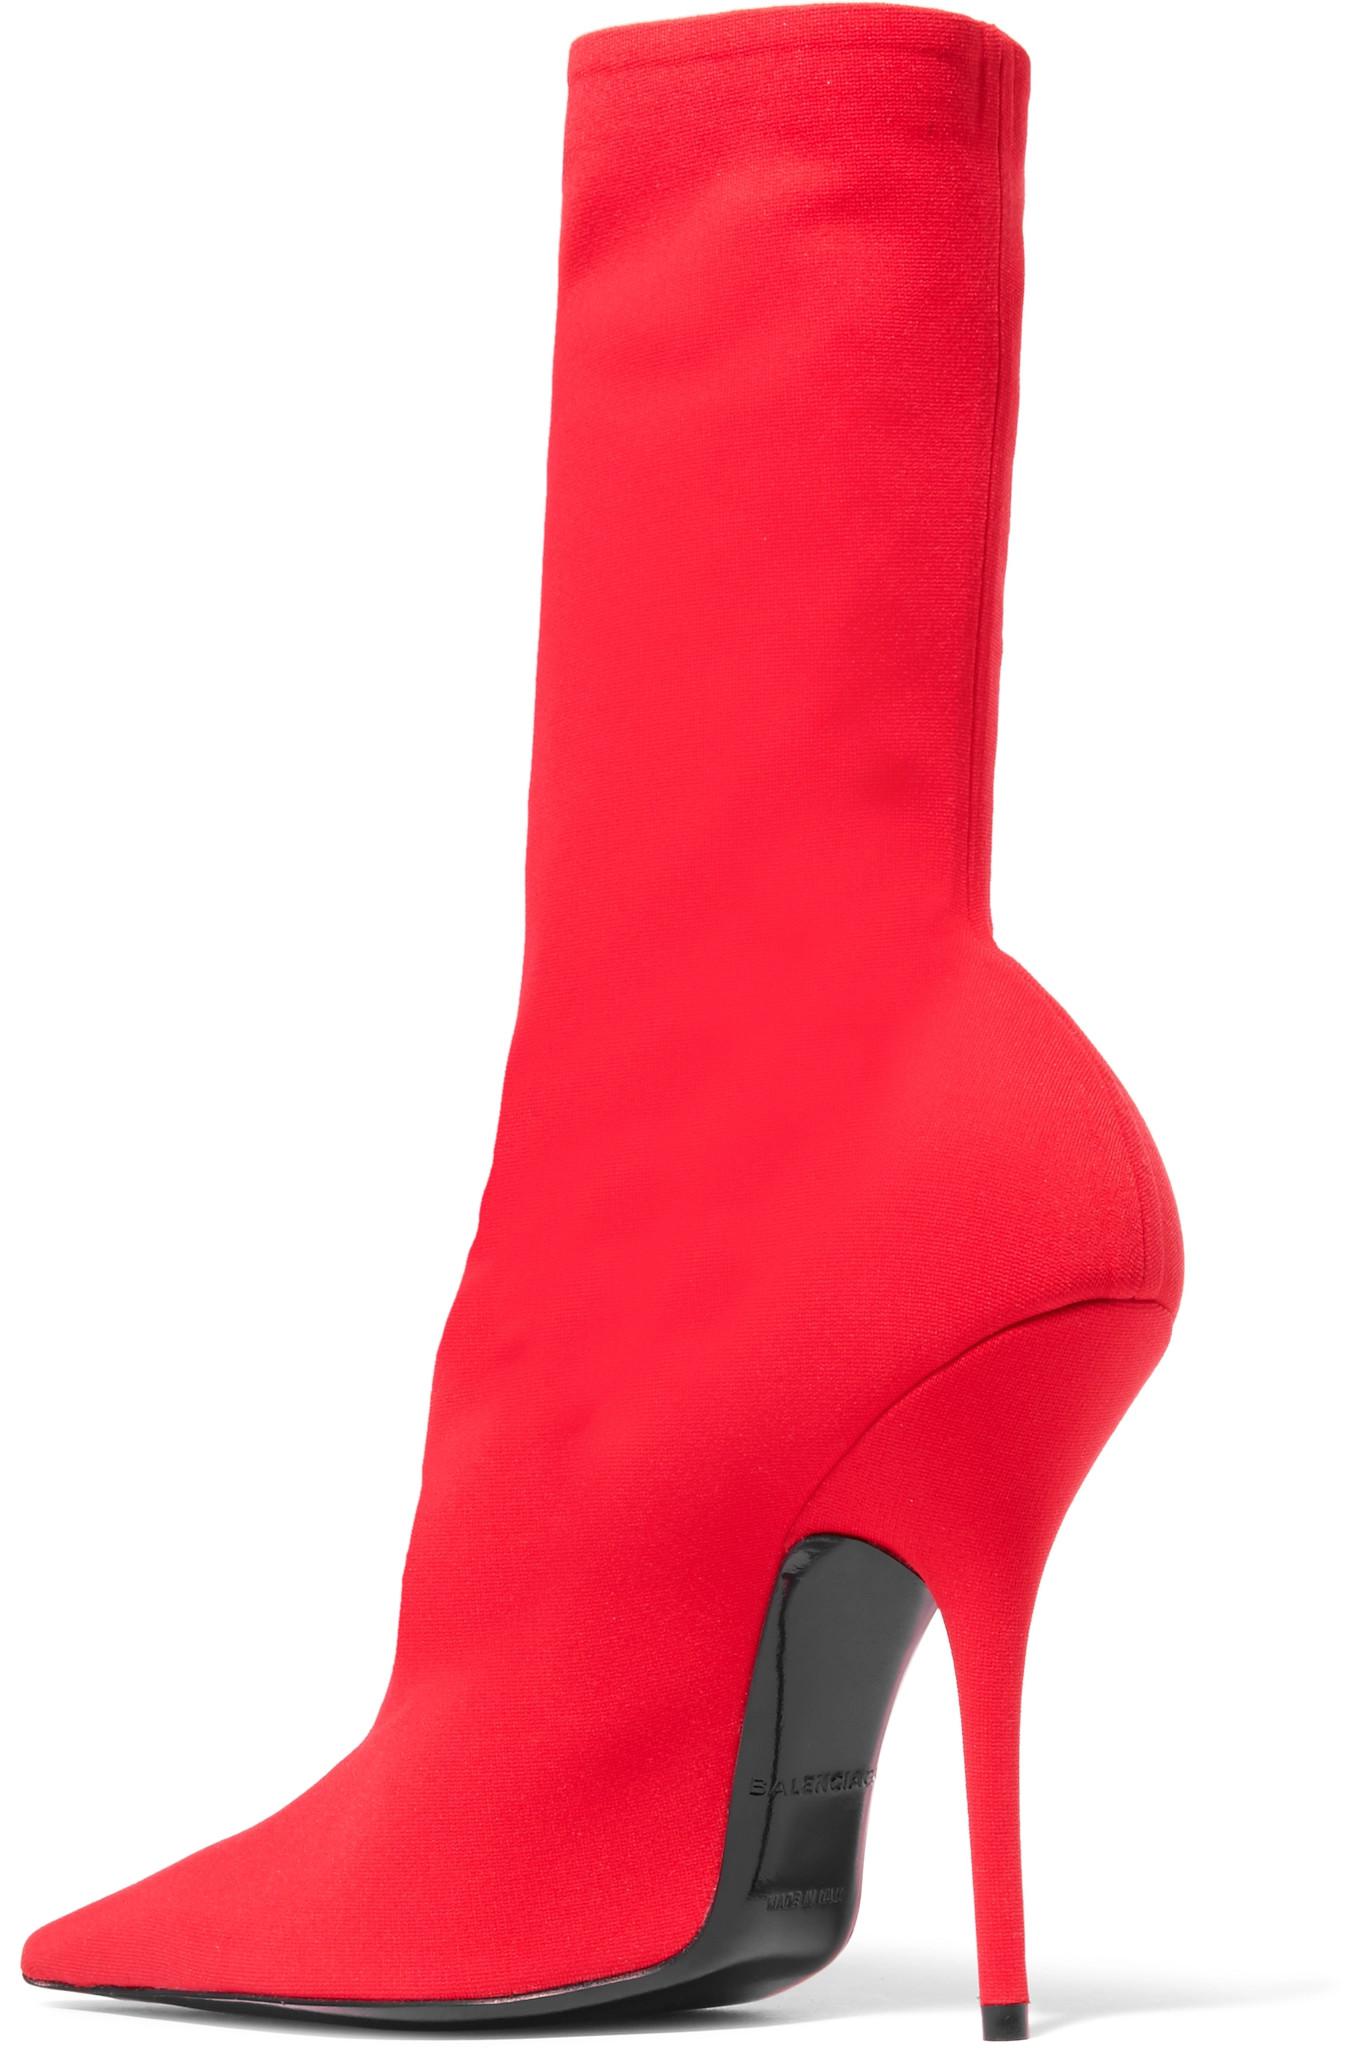 Balenciaga Stretch-jersey Ankle Boots in Red - Lyst